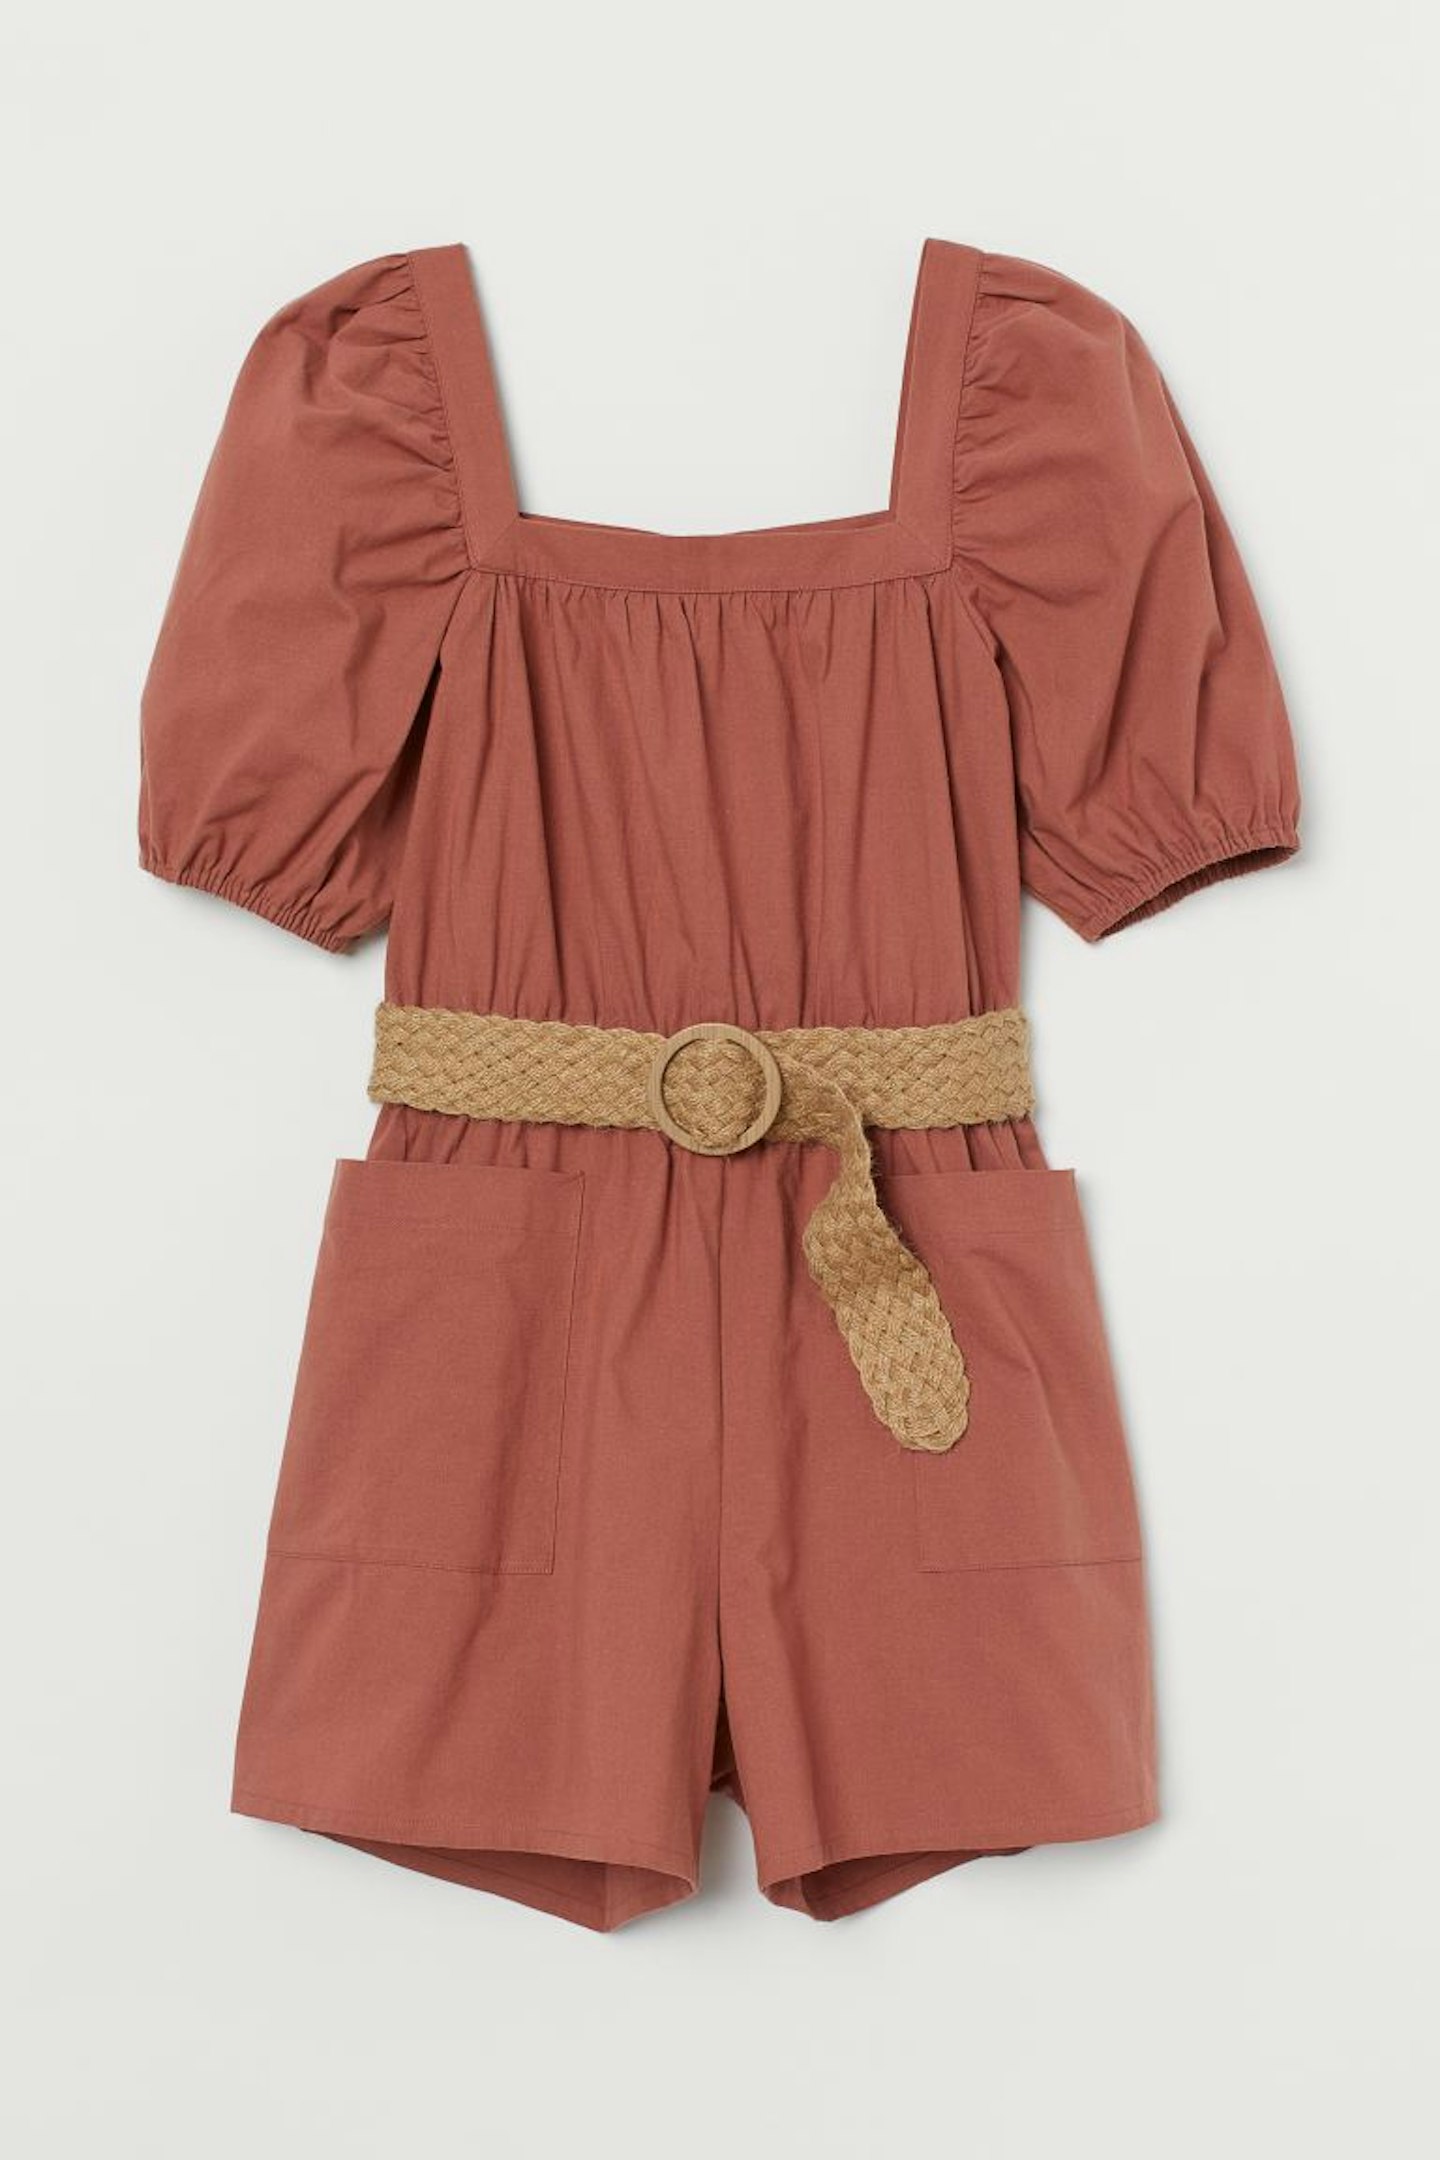 H&M, Belted Playsuit, WAS £29.99 NOW £21